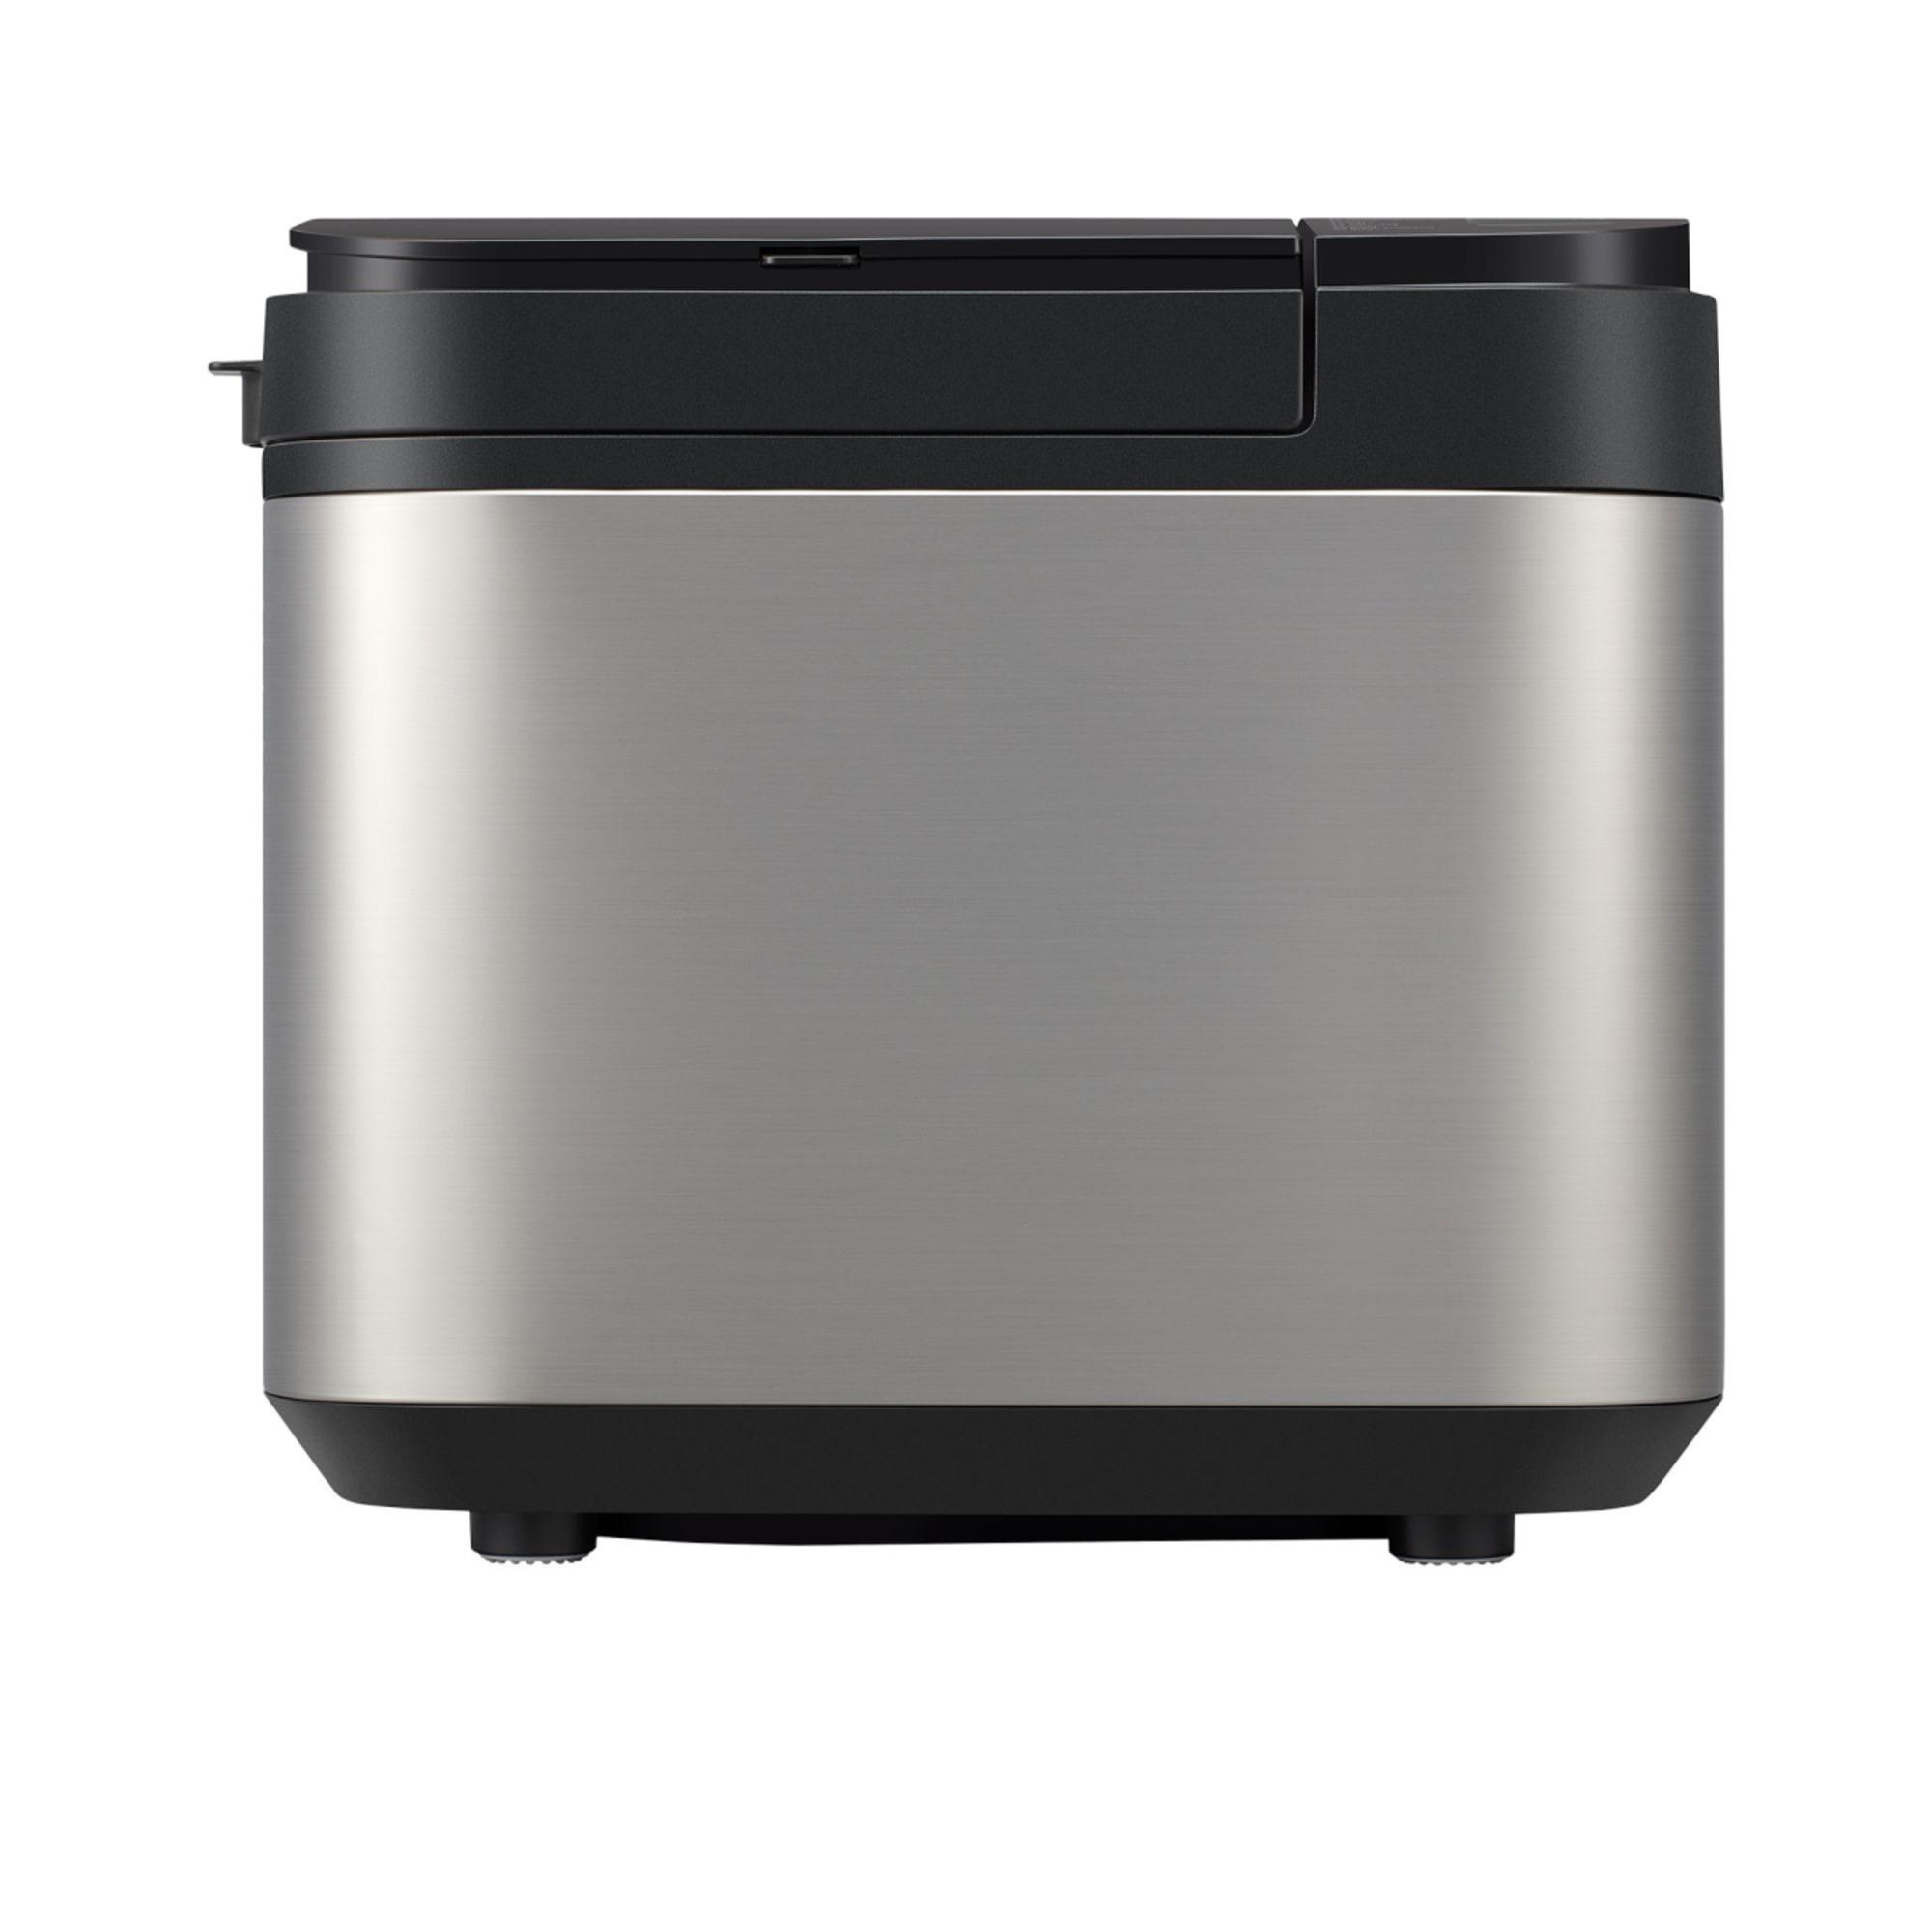 Panasonic Bread Maker with Dual Dispenser Stainless Steel Image 7